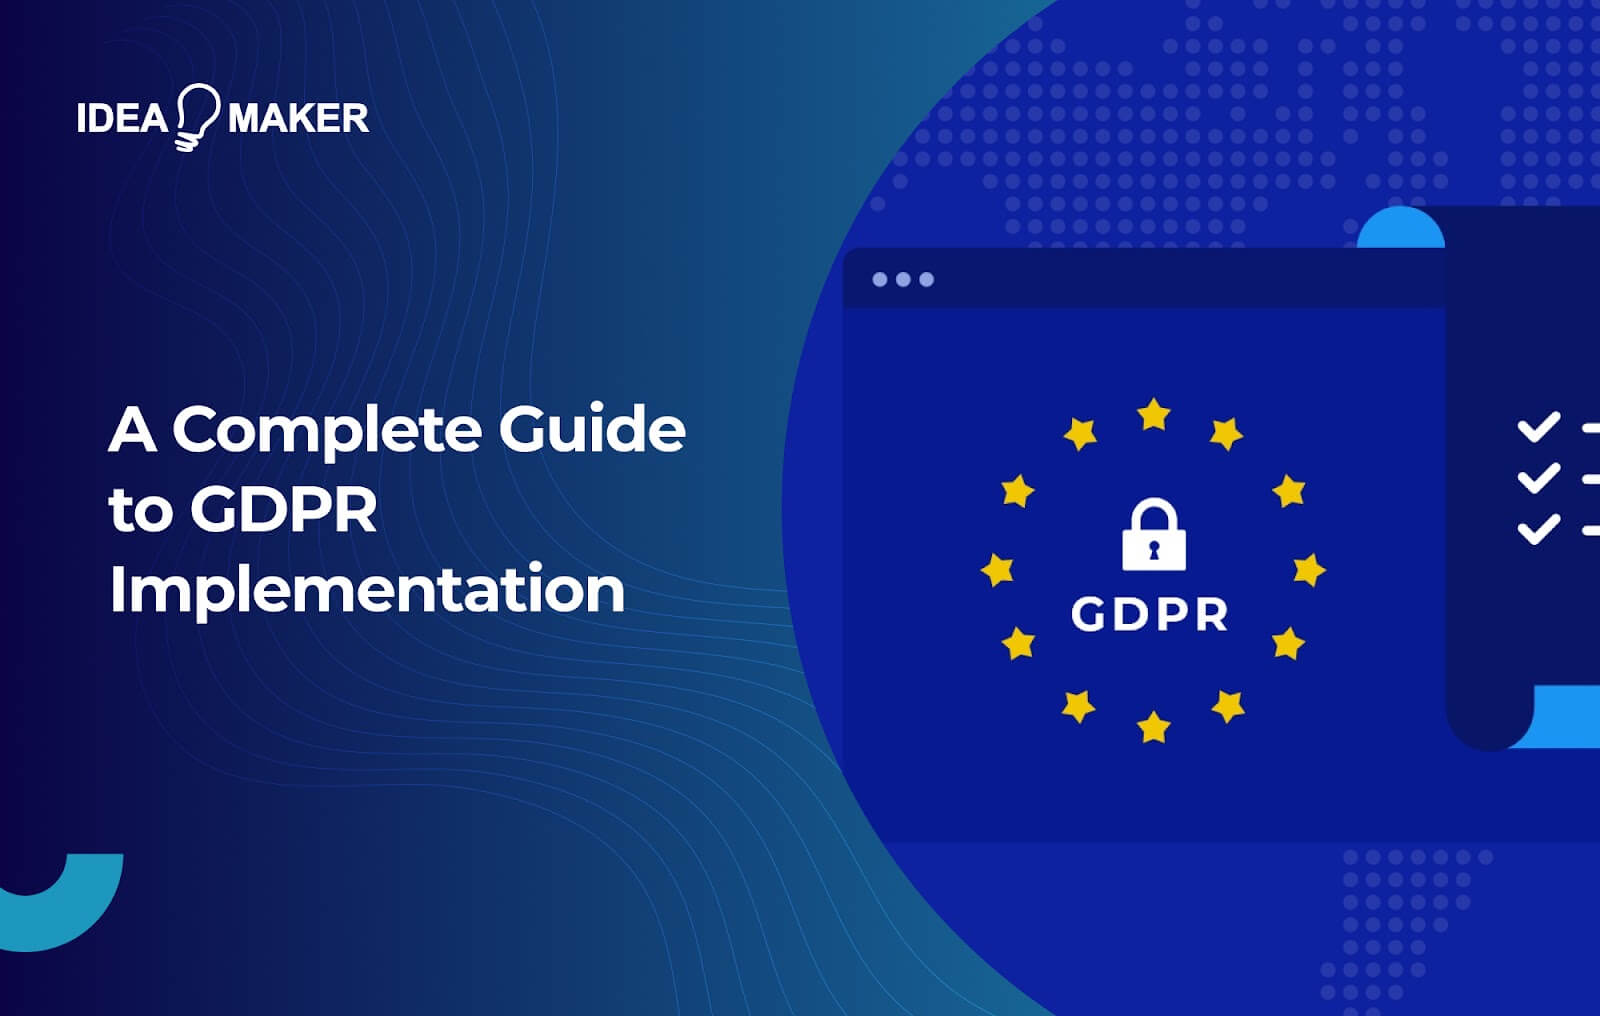 Ideamaker - A Complete Guide to GDPR Implementation